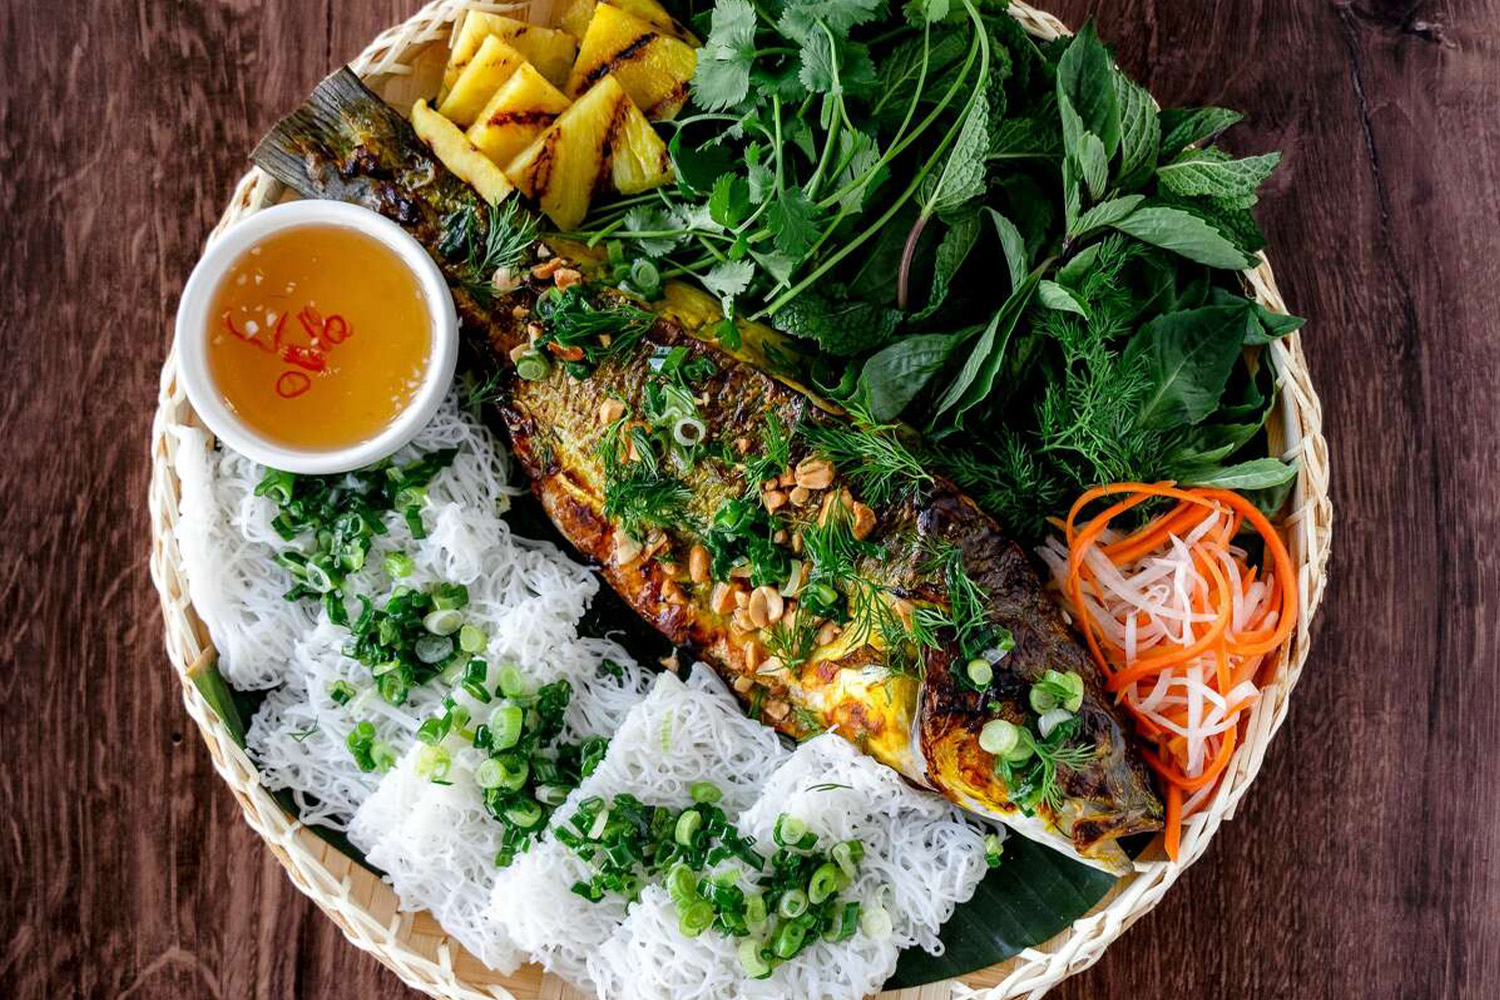 The Blind Goat's whole roasted turmeric fish